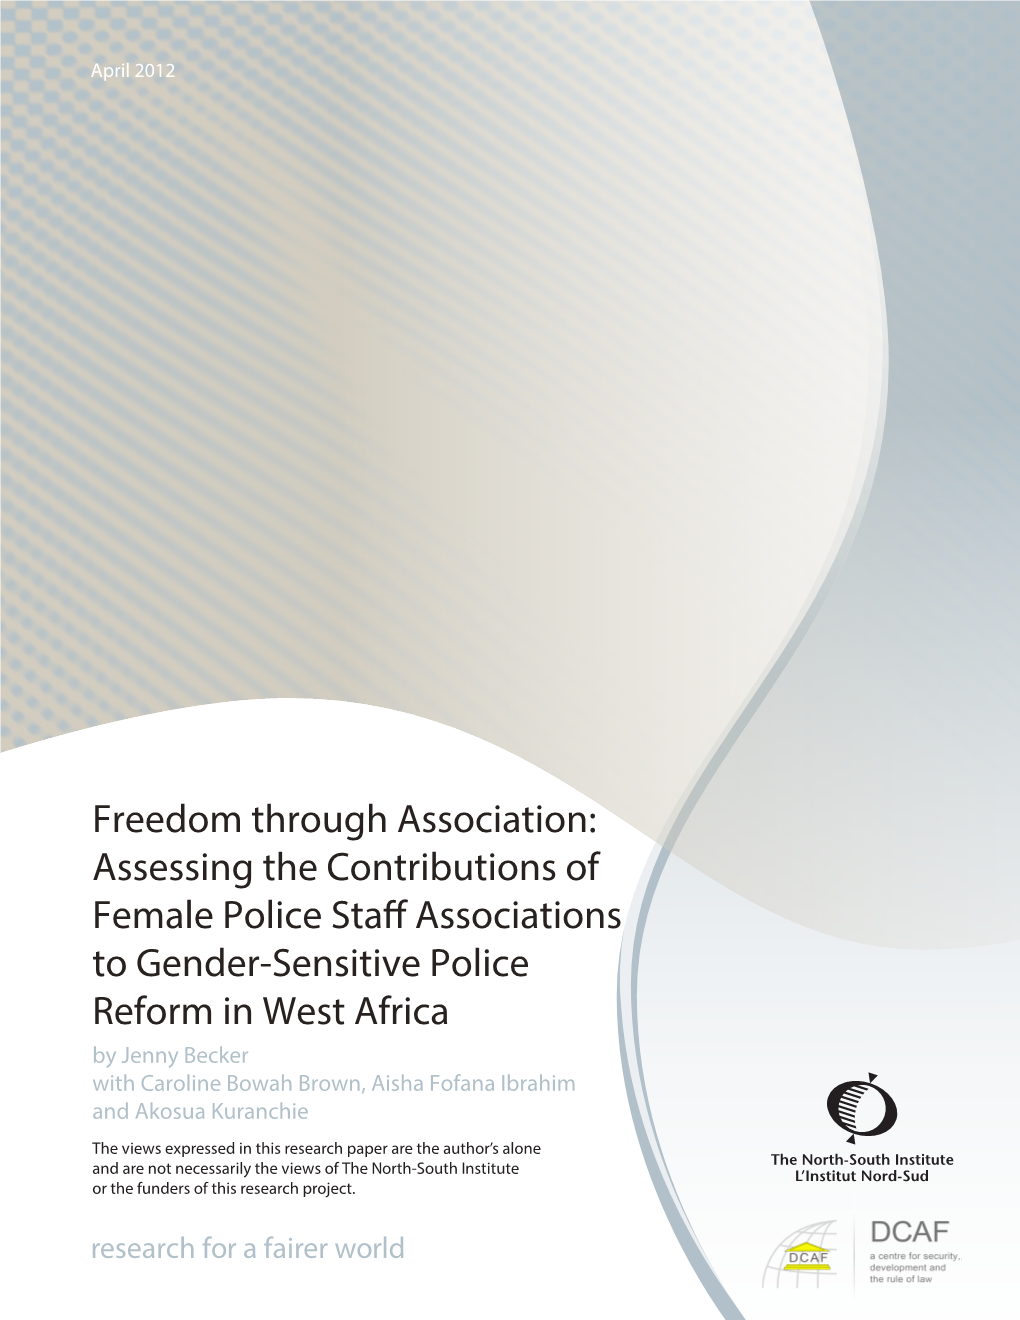 Freedom Through Association: Assessing the Contributions of To